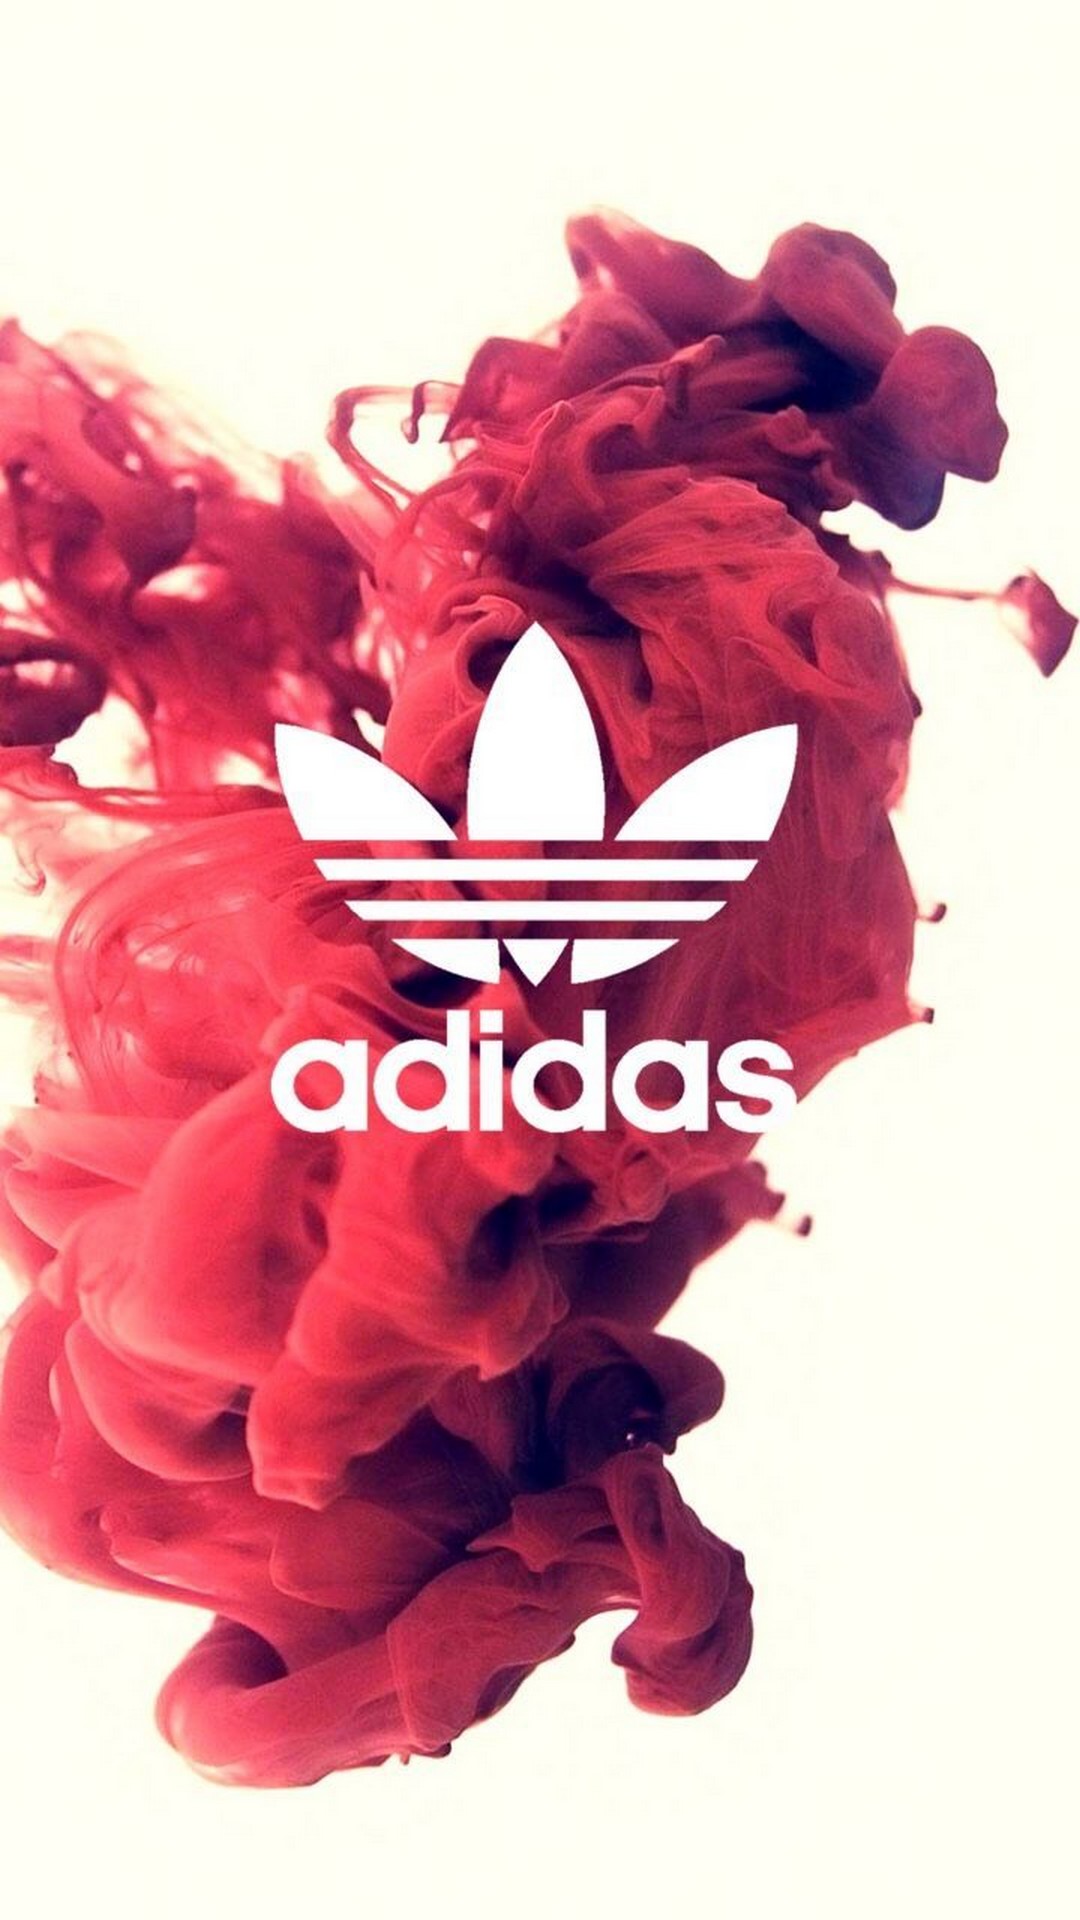 iPhone 7 Wallpaper Adidas With high-resolution 1080X1920 pixel. You can use this wallpaper for your Windows and Mac OS computers as well as your Android and iPhone smartphones